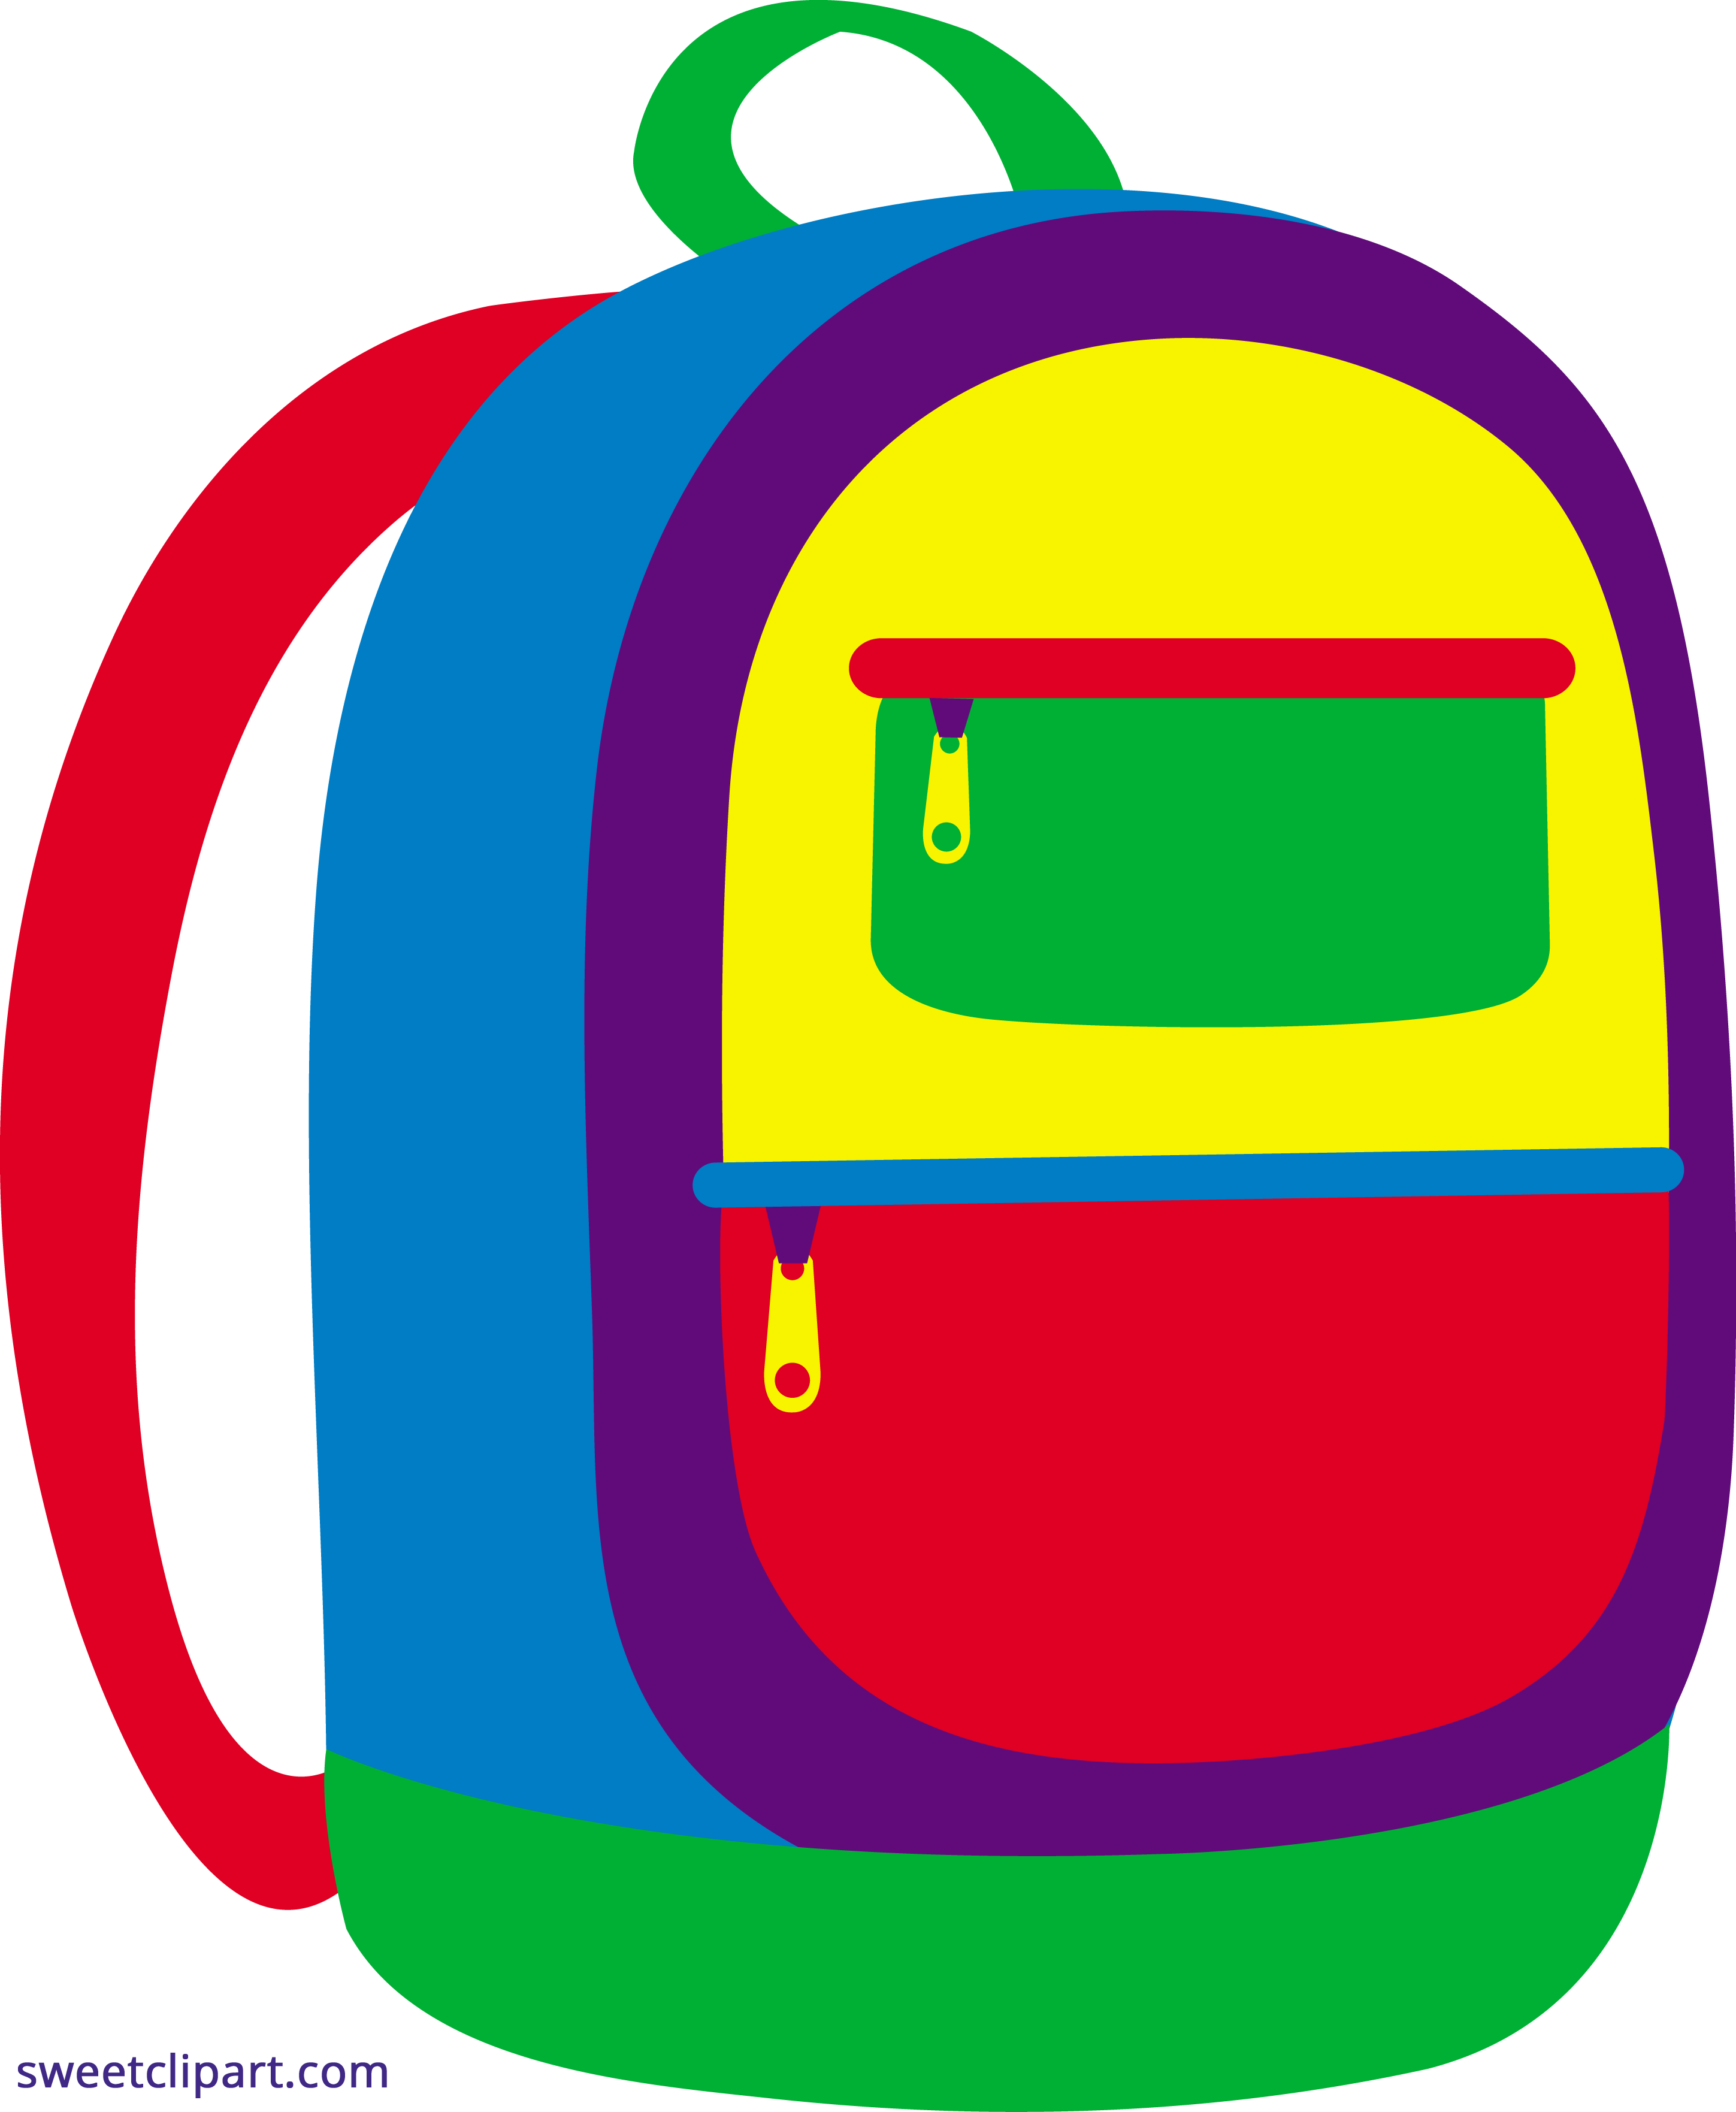 Backpack clipart. Colorful sweet clip art